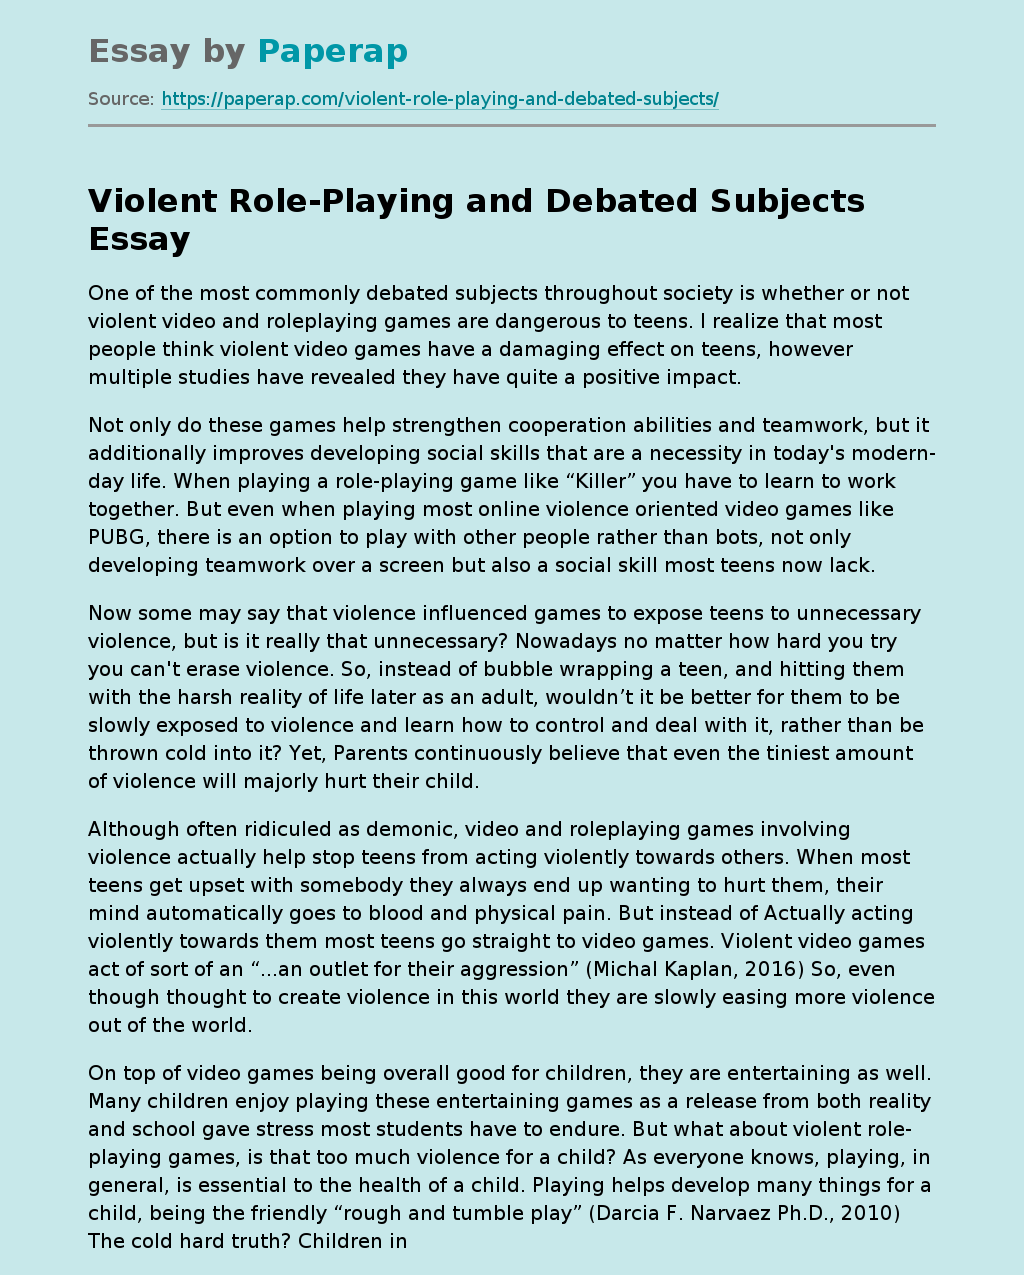 Violent Role-Playing and Debated Subjects